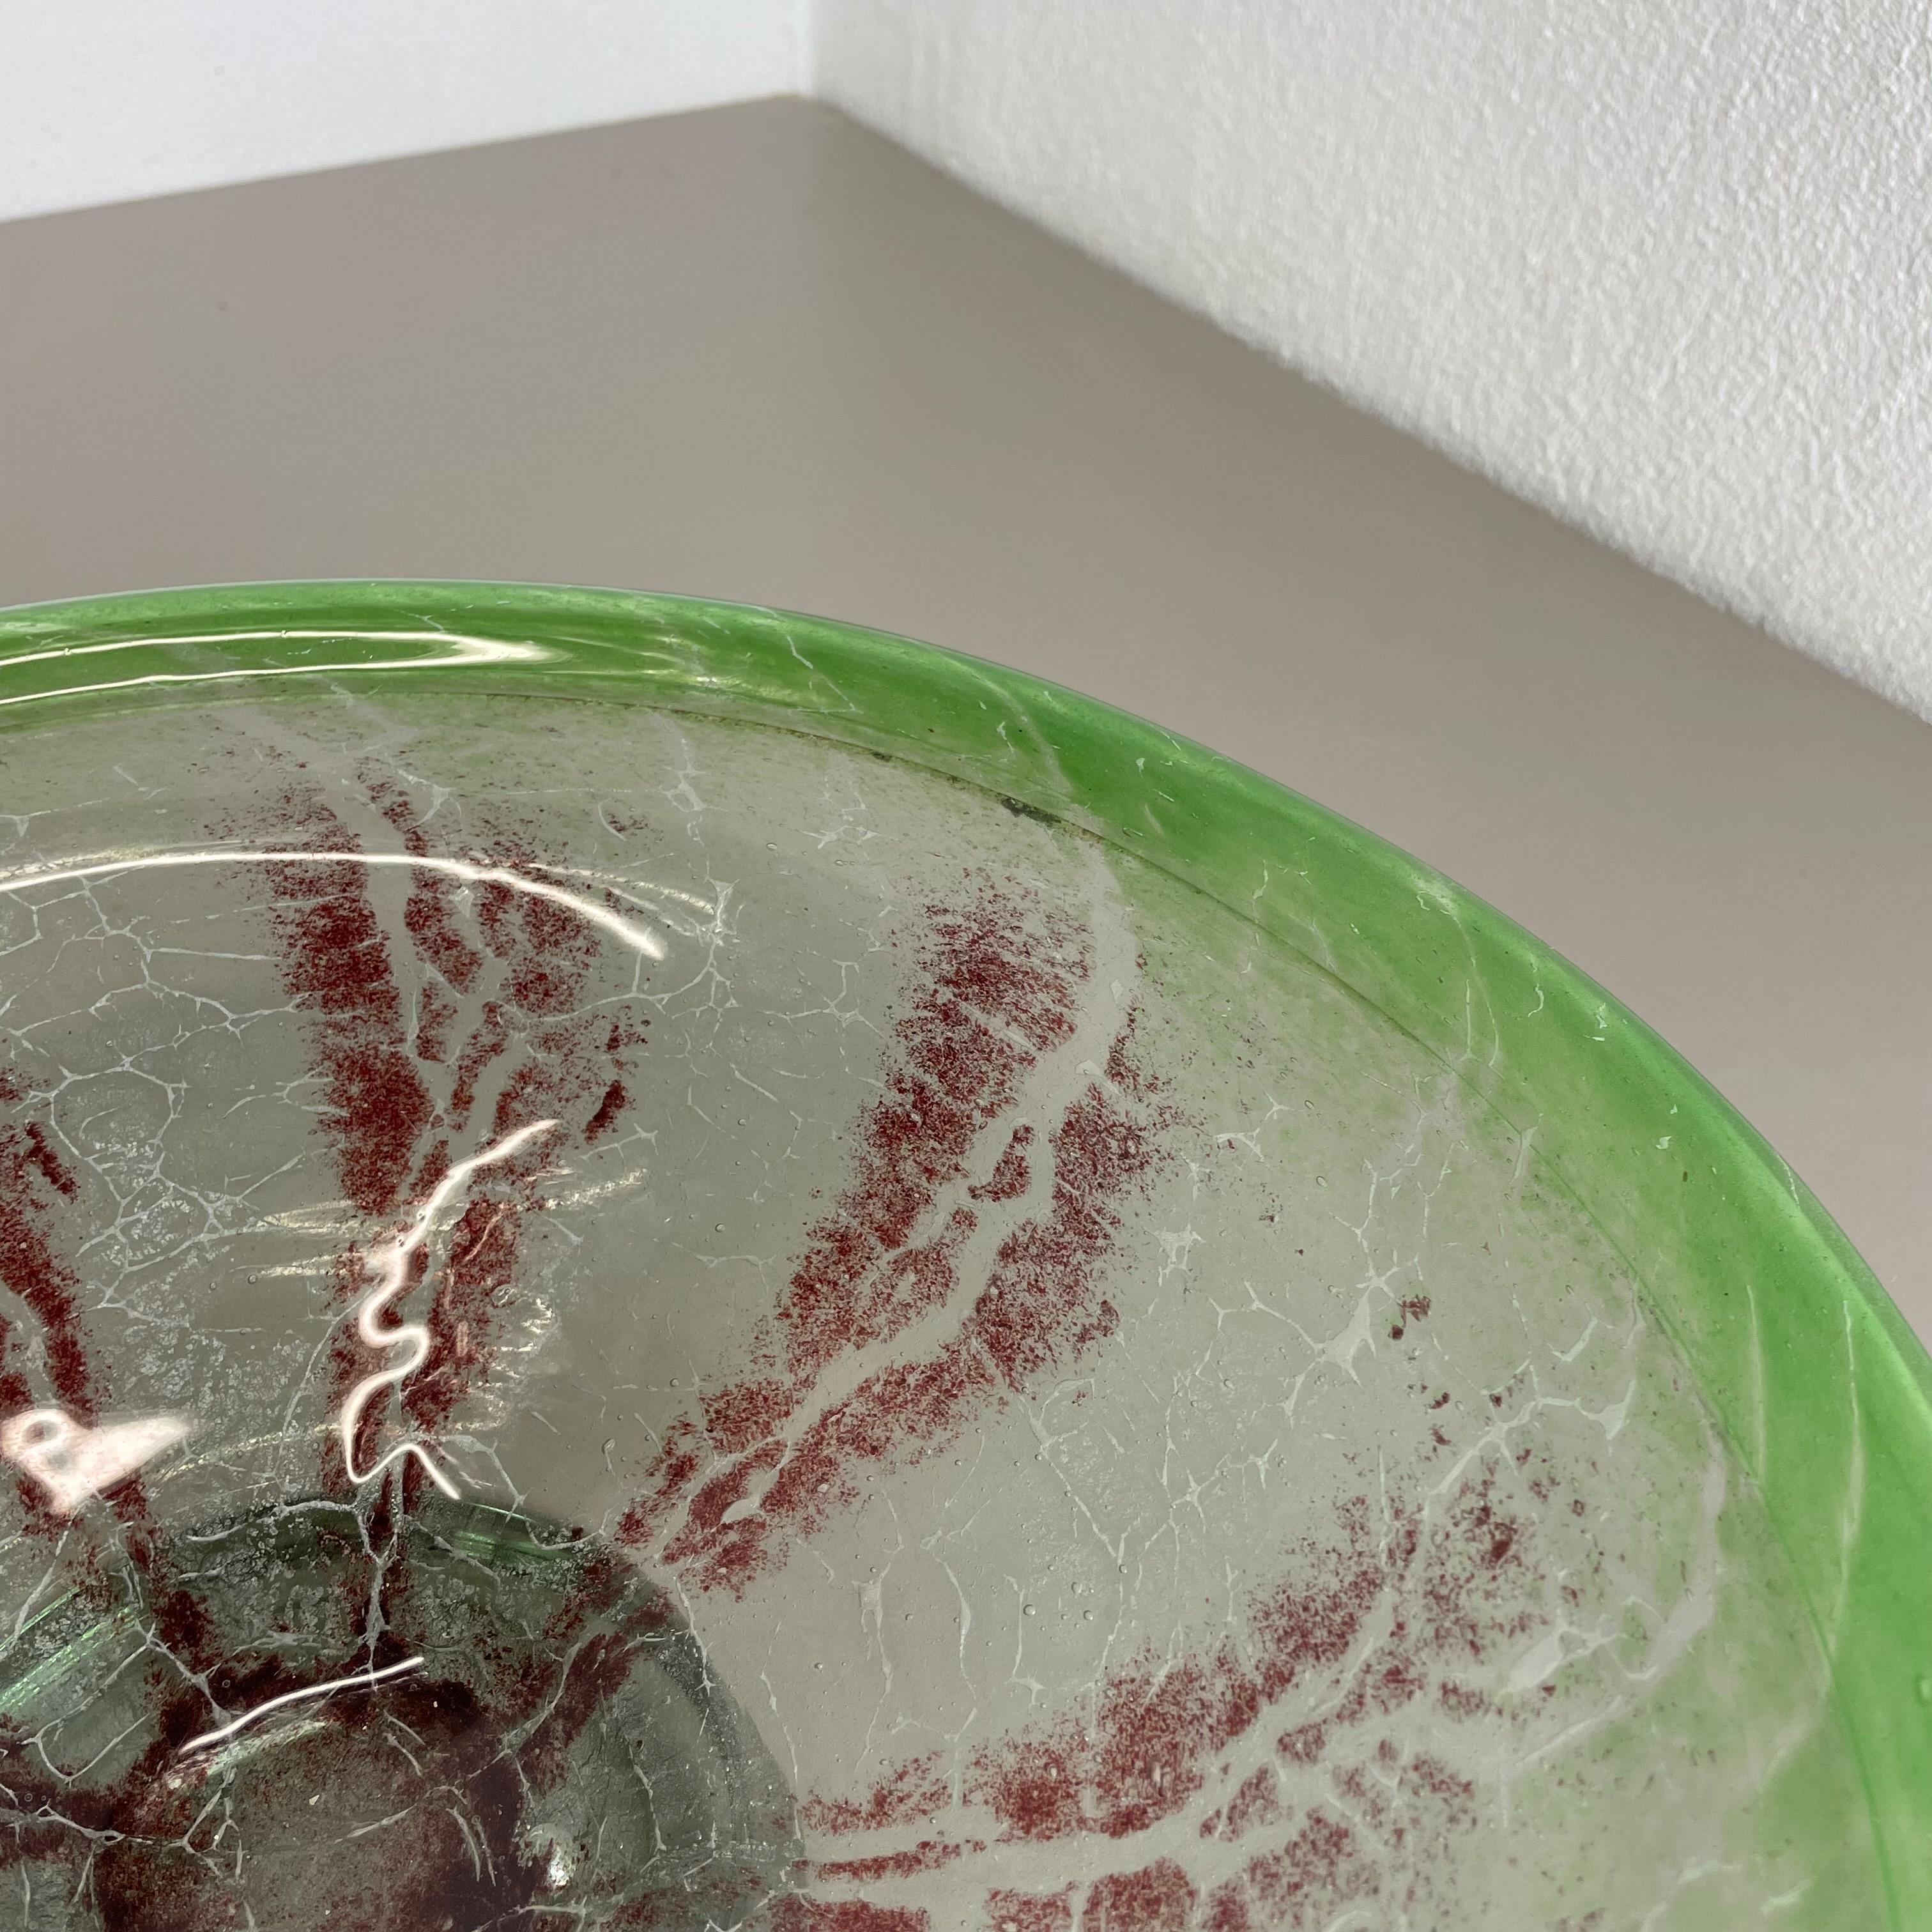 Large Baushaus Art Deco Glass Bowl by Karl Wiedmann for WMF Ikora, Germany 1930s For Sale 3